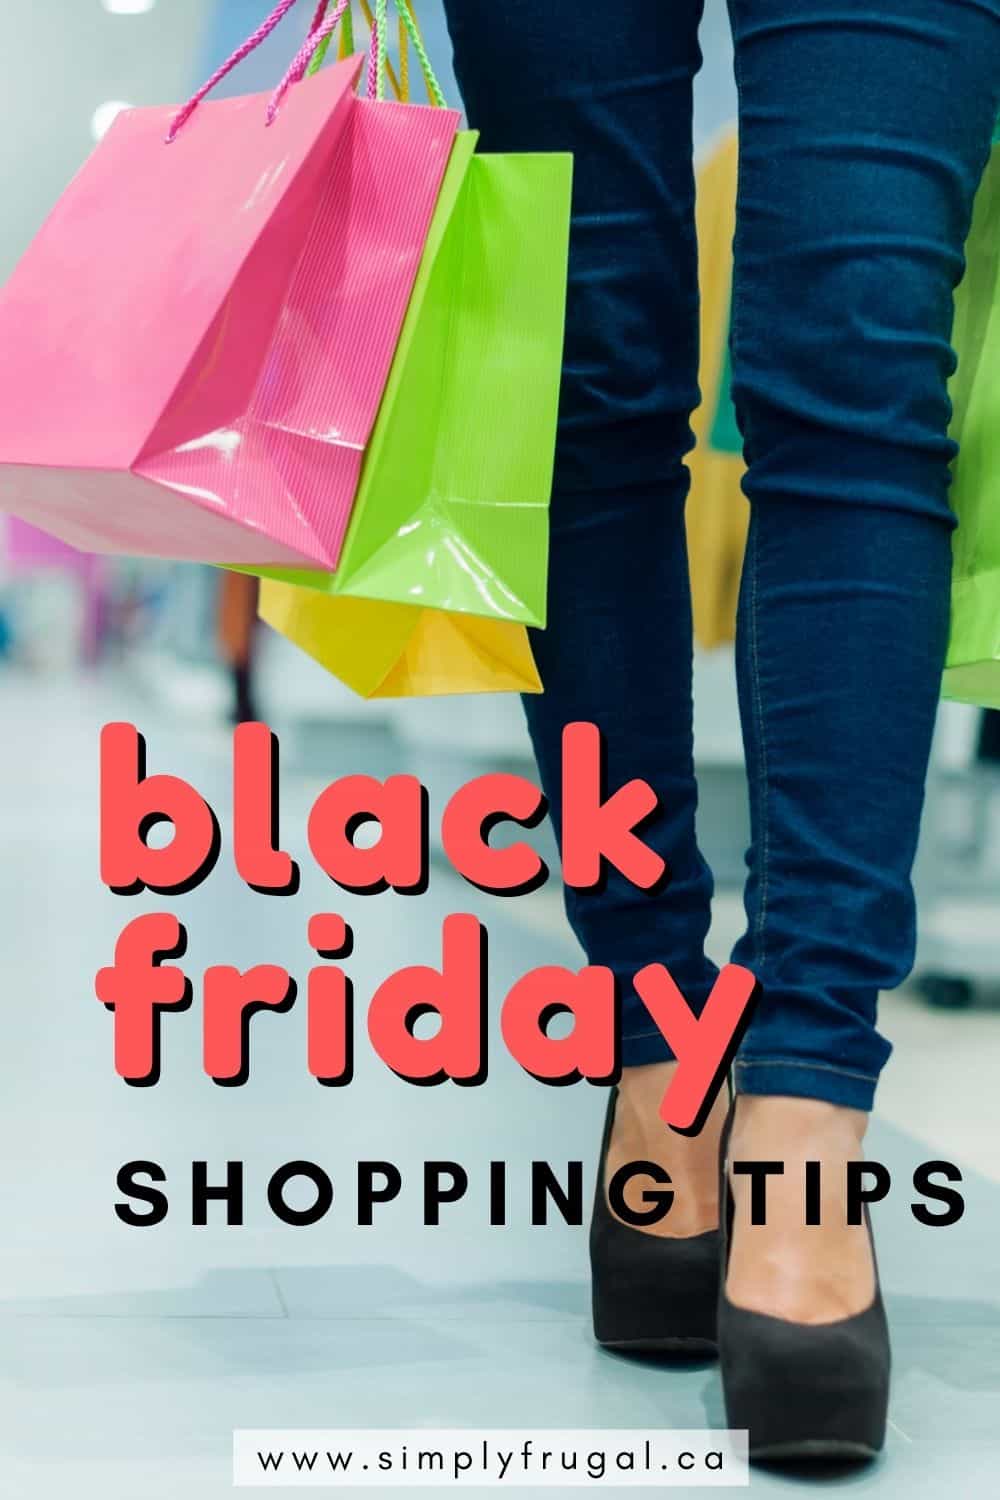 Black Friday. Perhaps the biggest shopping day of the year is nearly upon us. Be prepared and find excellent Black Friday Shopping tips here!